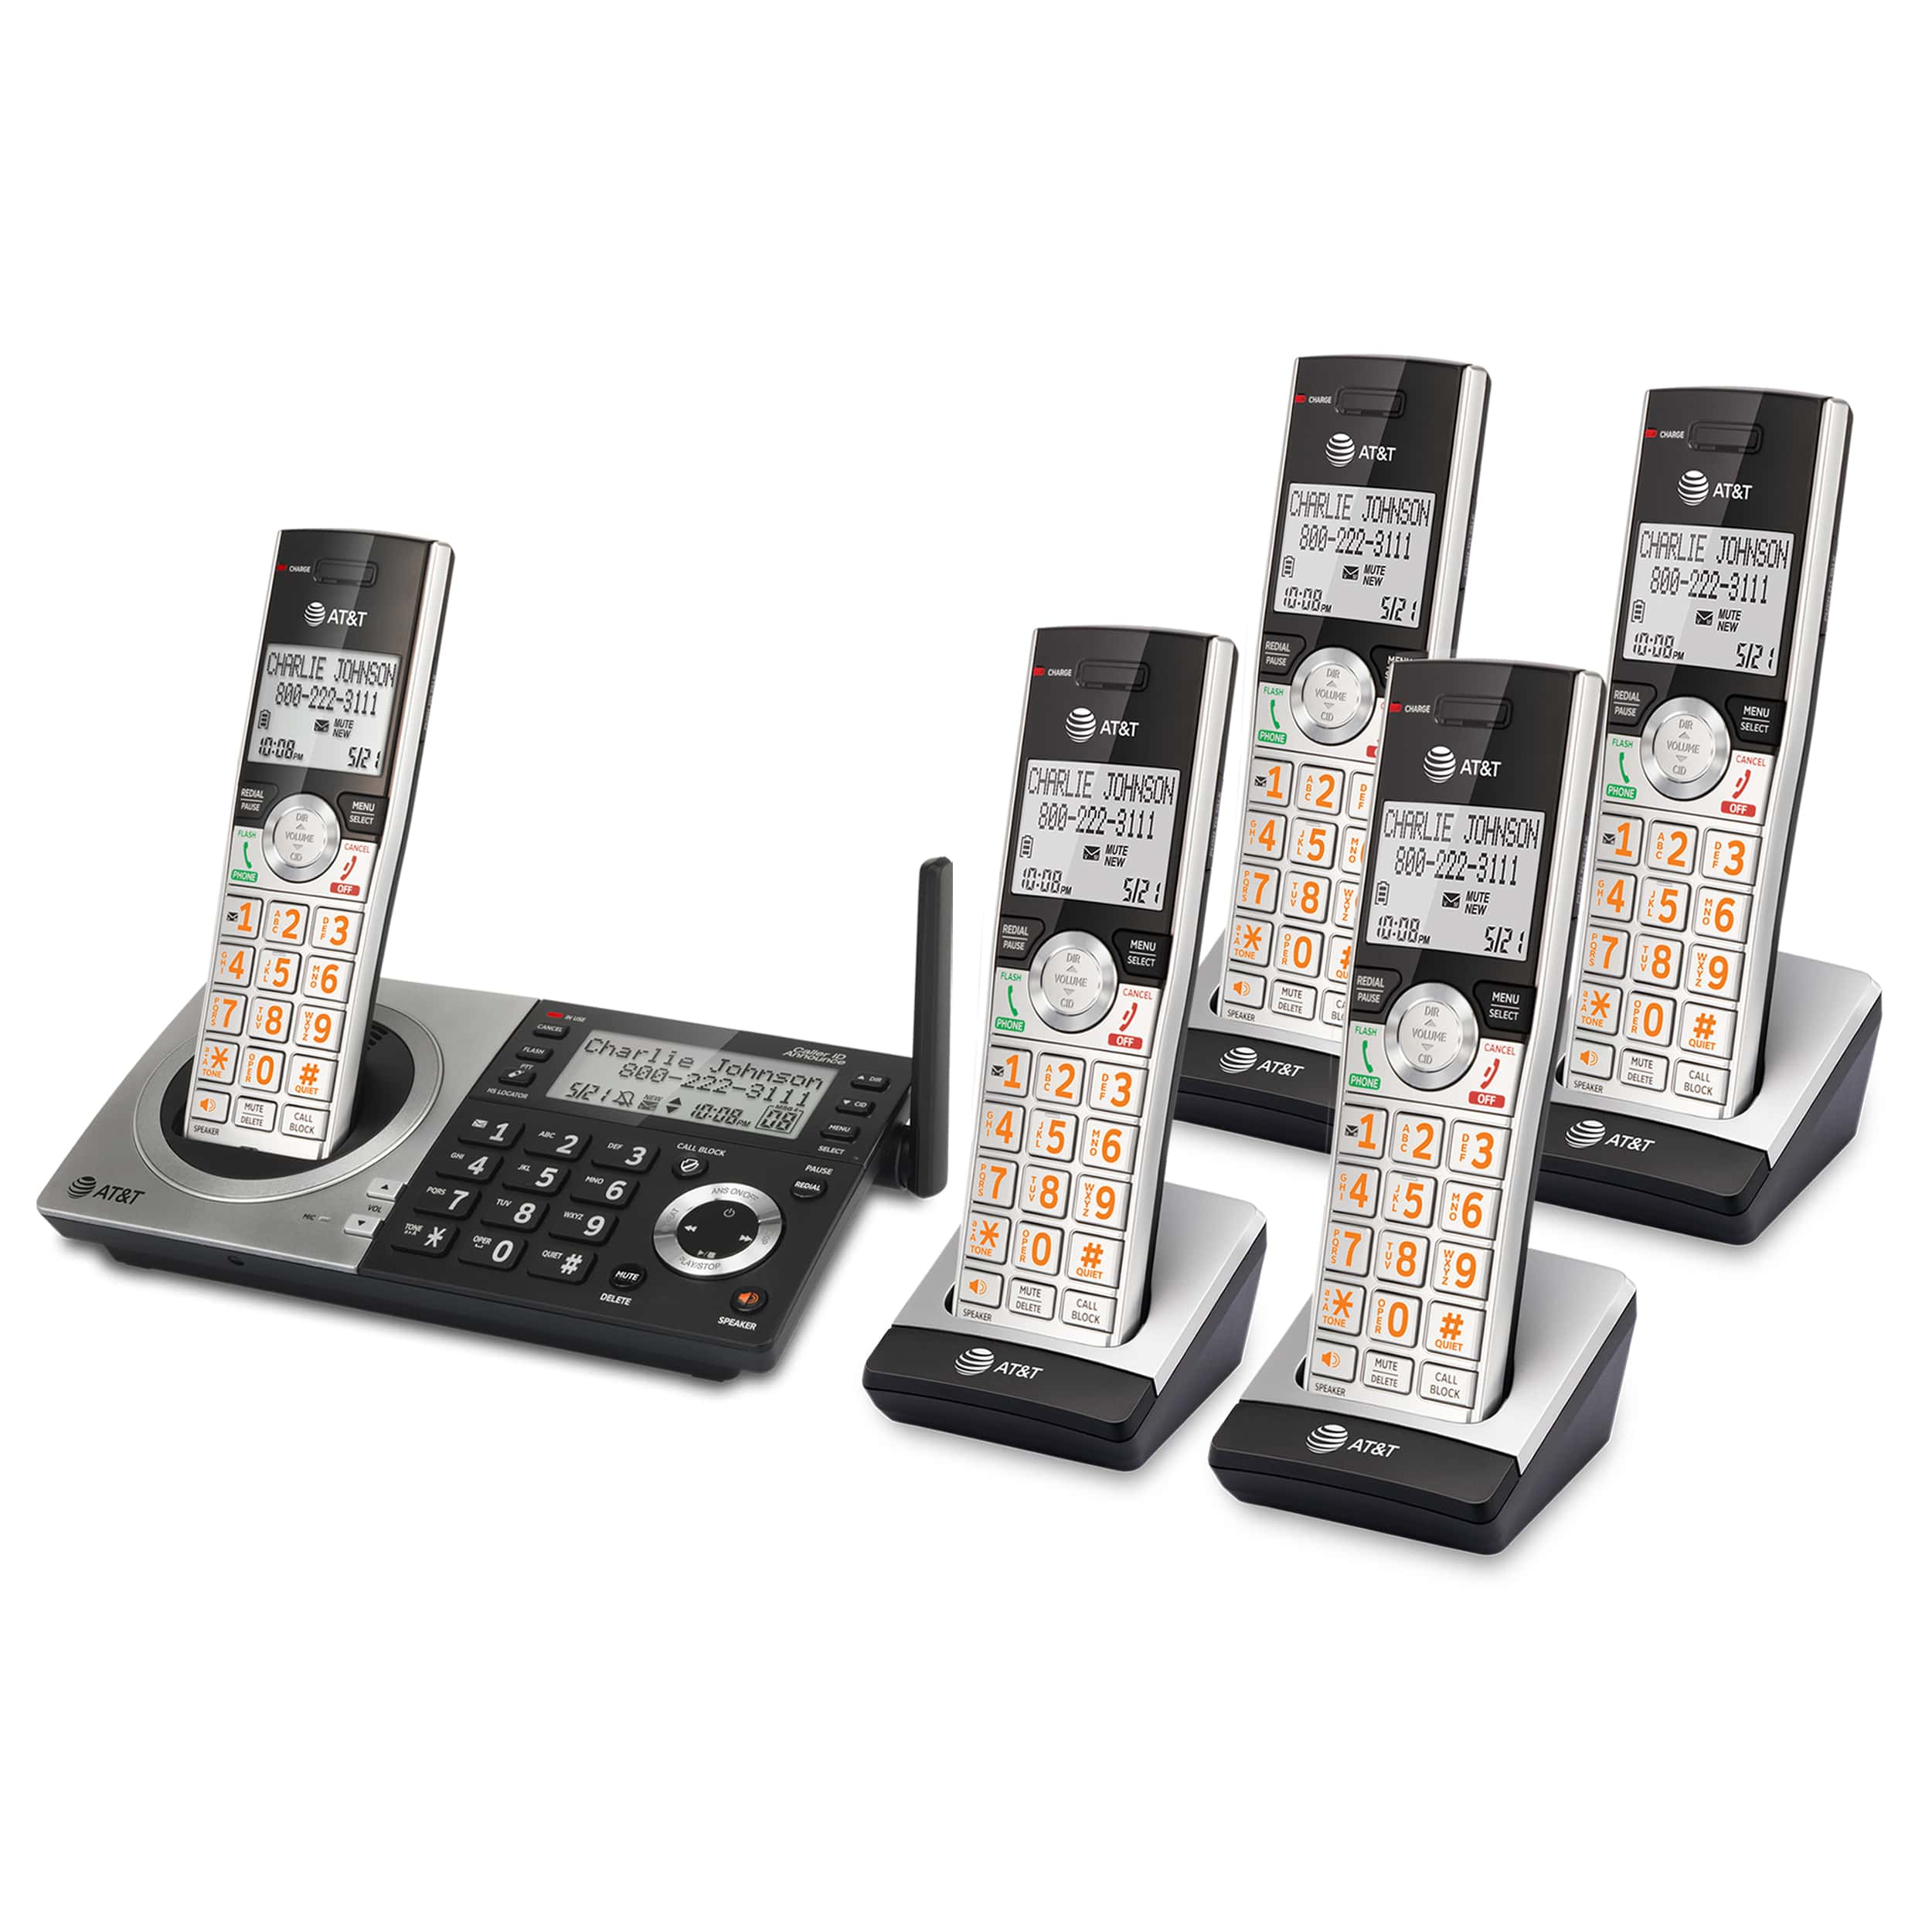 5-Handset Expandable Cordless Phone with Unsurpassed Range, Smart Call Blocker and Answering System - view 2